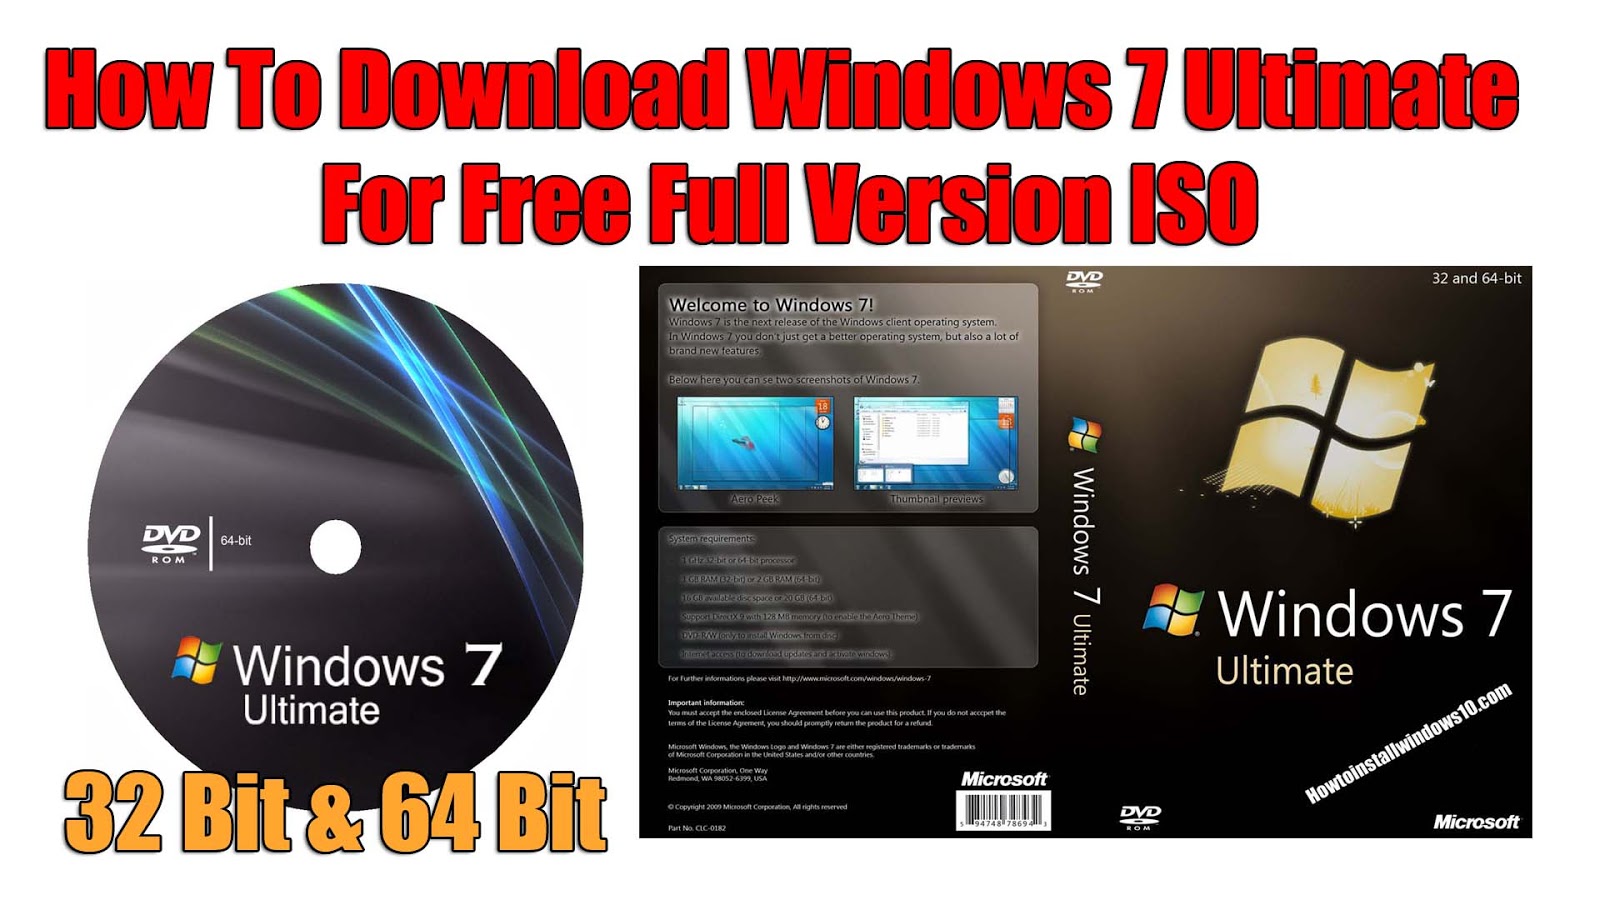 free windows pro 10 download full version and product key